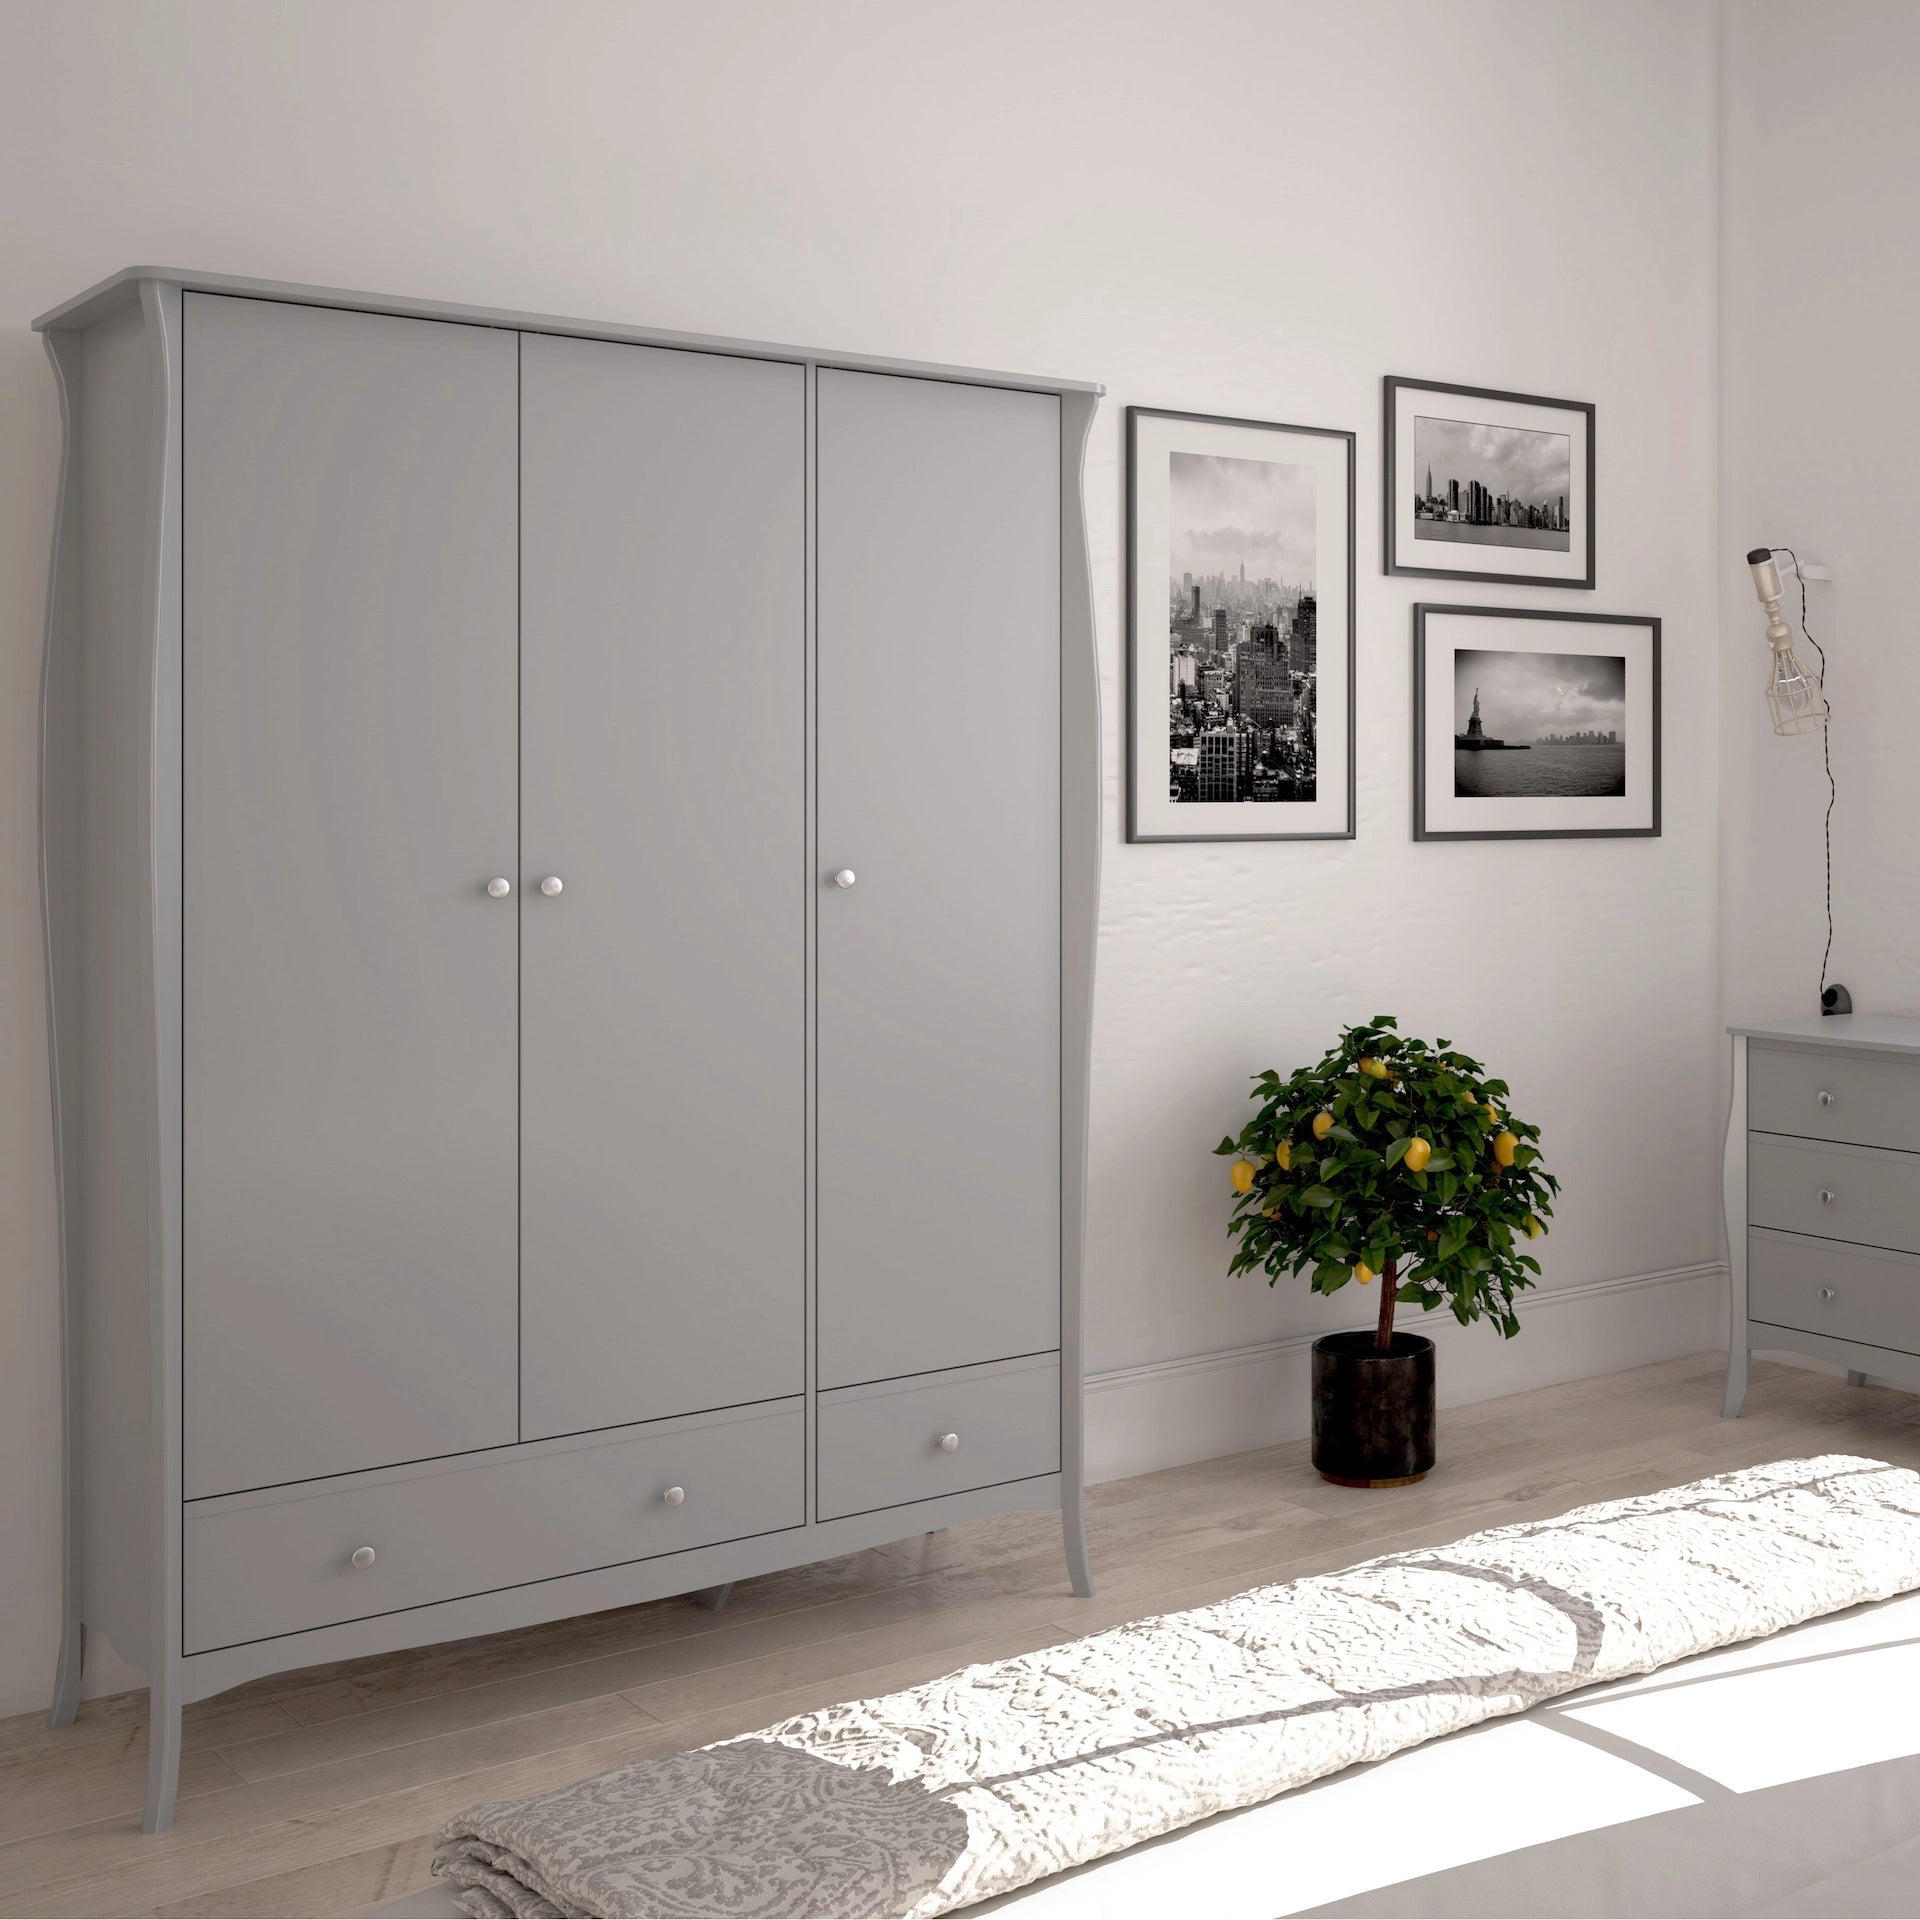 Furniture To Go Baroque 3Dr 2 Drw Robe Grey